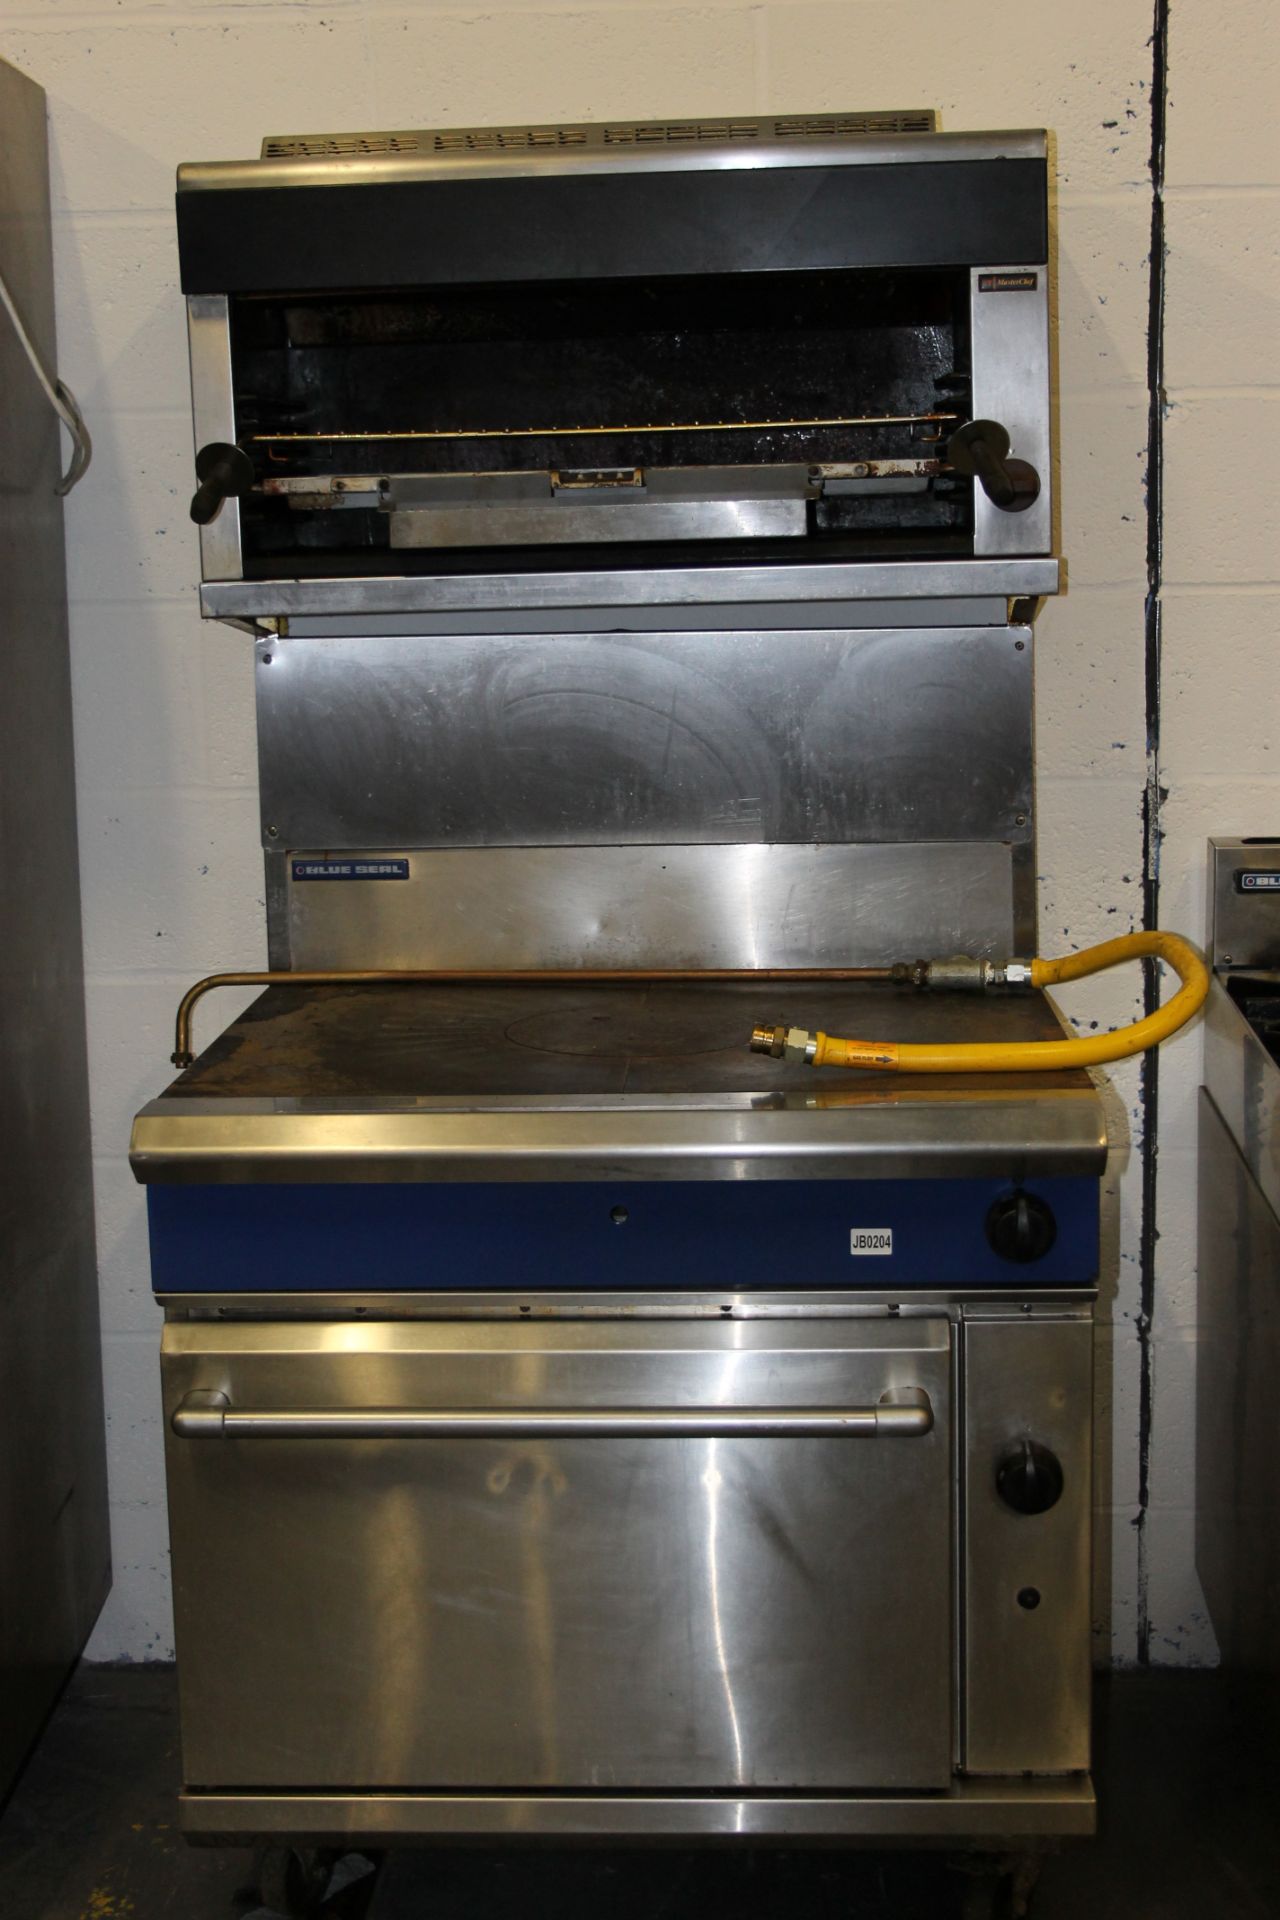 Blue Seal Solid Top Cooker with Double Oven - Gas + Over Head Master Chef Gas Grill